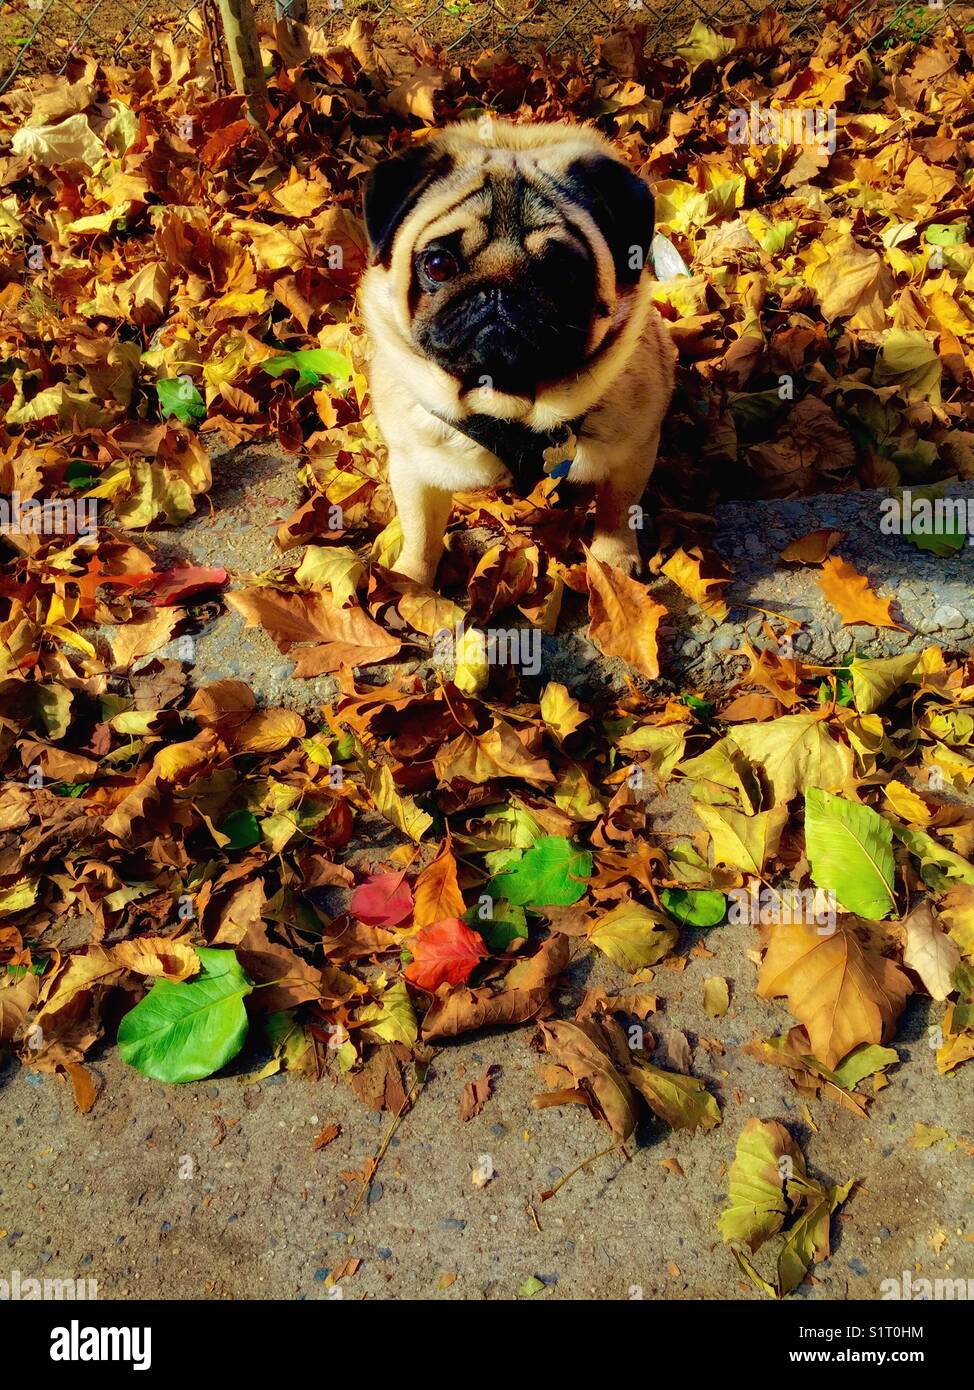 Thanksgiving Pug surrounded by colorful leaves Stock Photo